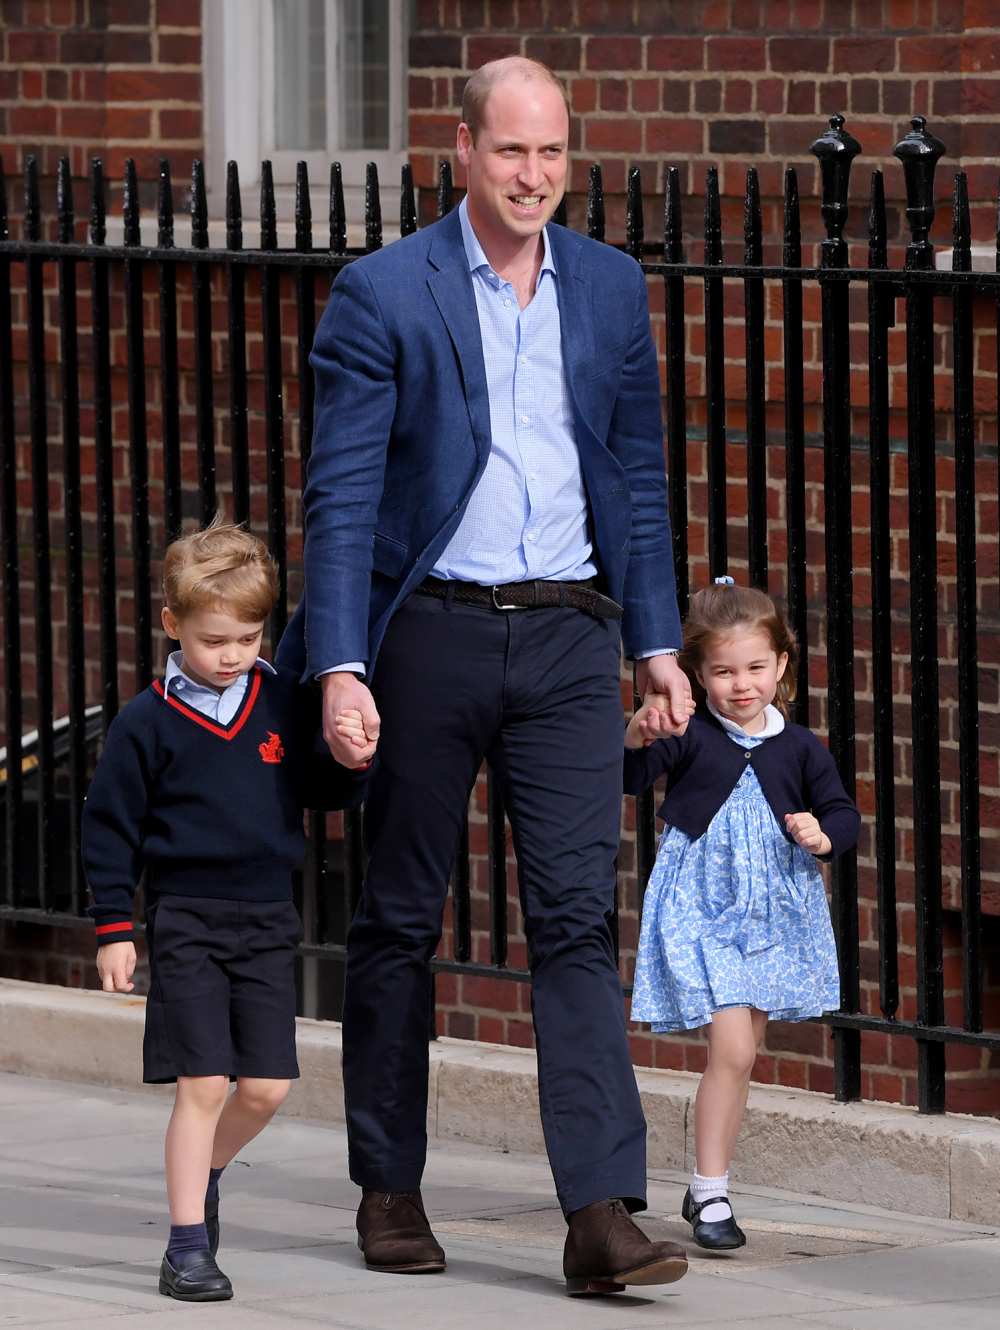 rince William: Prince George and Princess Charlotte Are ‘Interested’ in Homeless People They See on Way to School